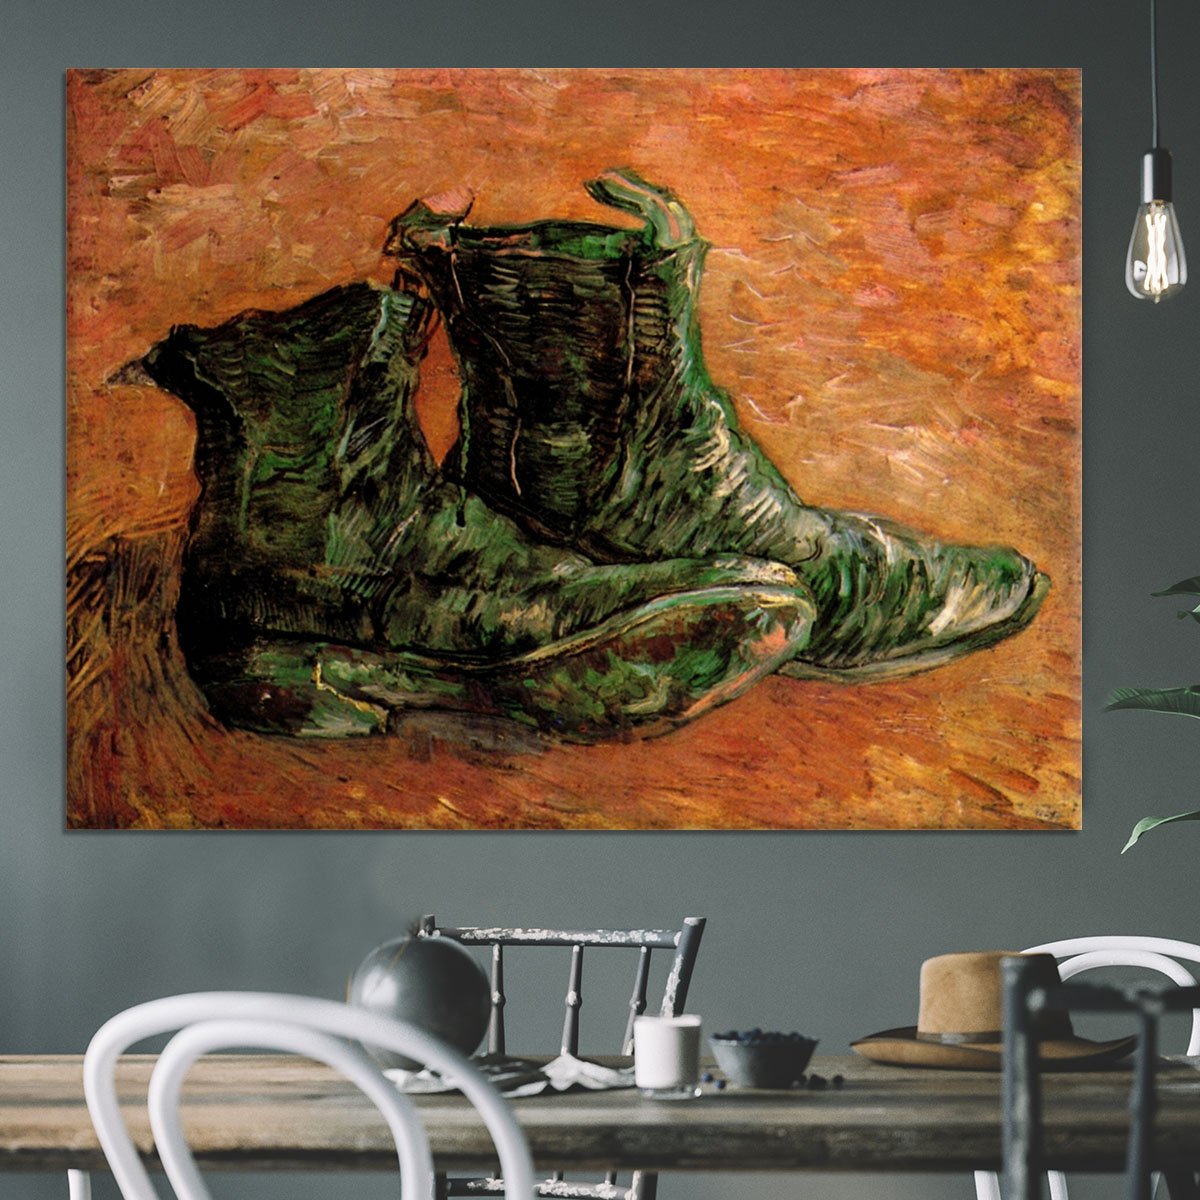 A Pair of Shoes by Van Gogh Canvas Print or Poster